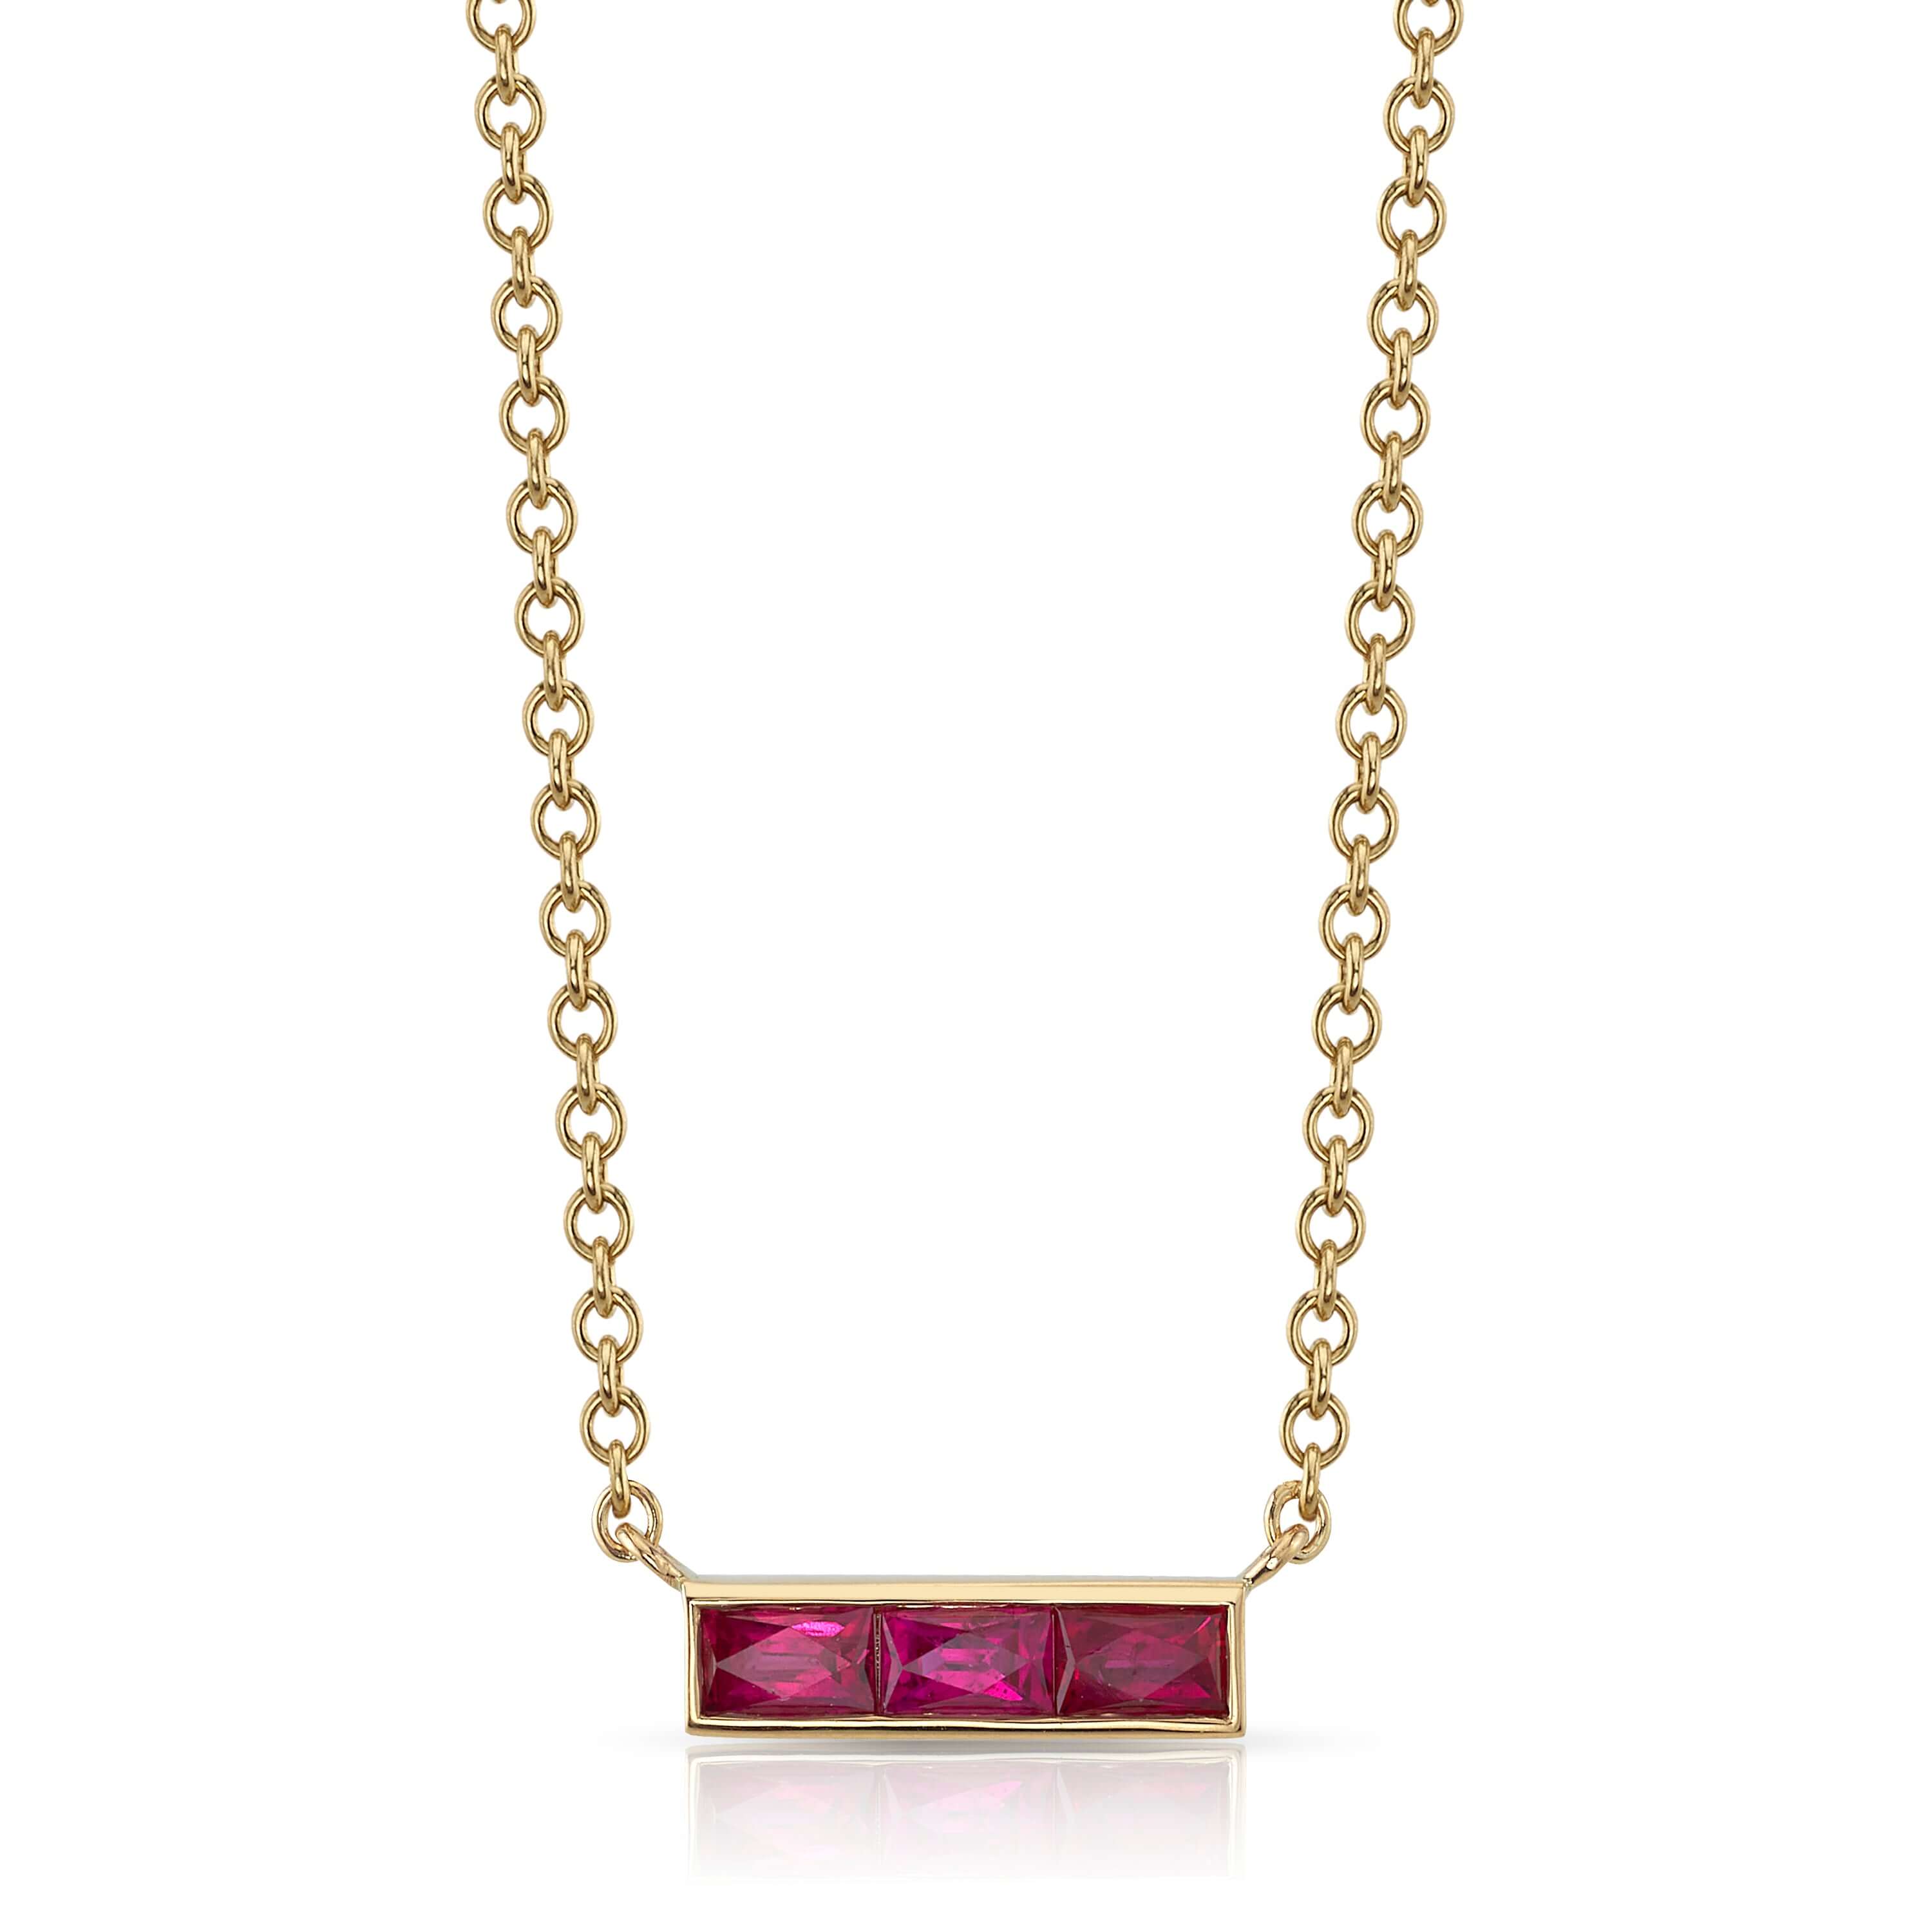 SINGLE STONE MONET NECKLACE WITH GEMSTONES featuring Approximately 0.50ctw French cut rubies or sapphires set in a handcrafted bar pendant. Necklace measures 17".